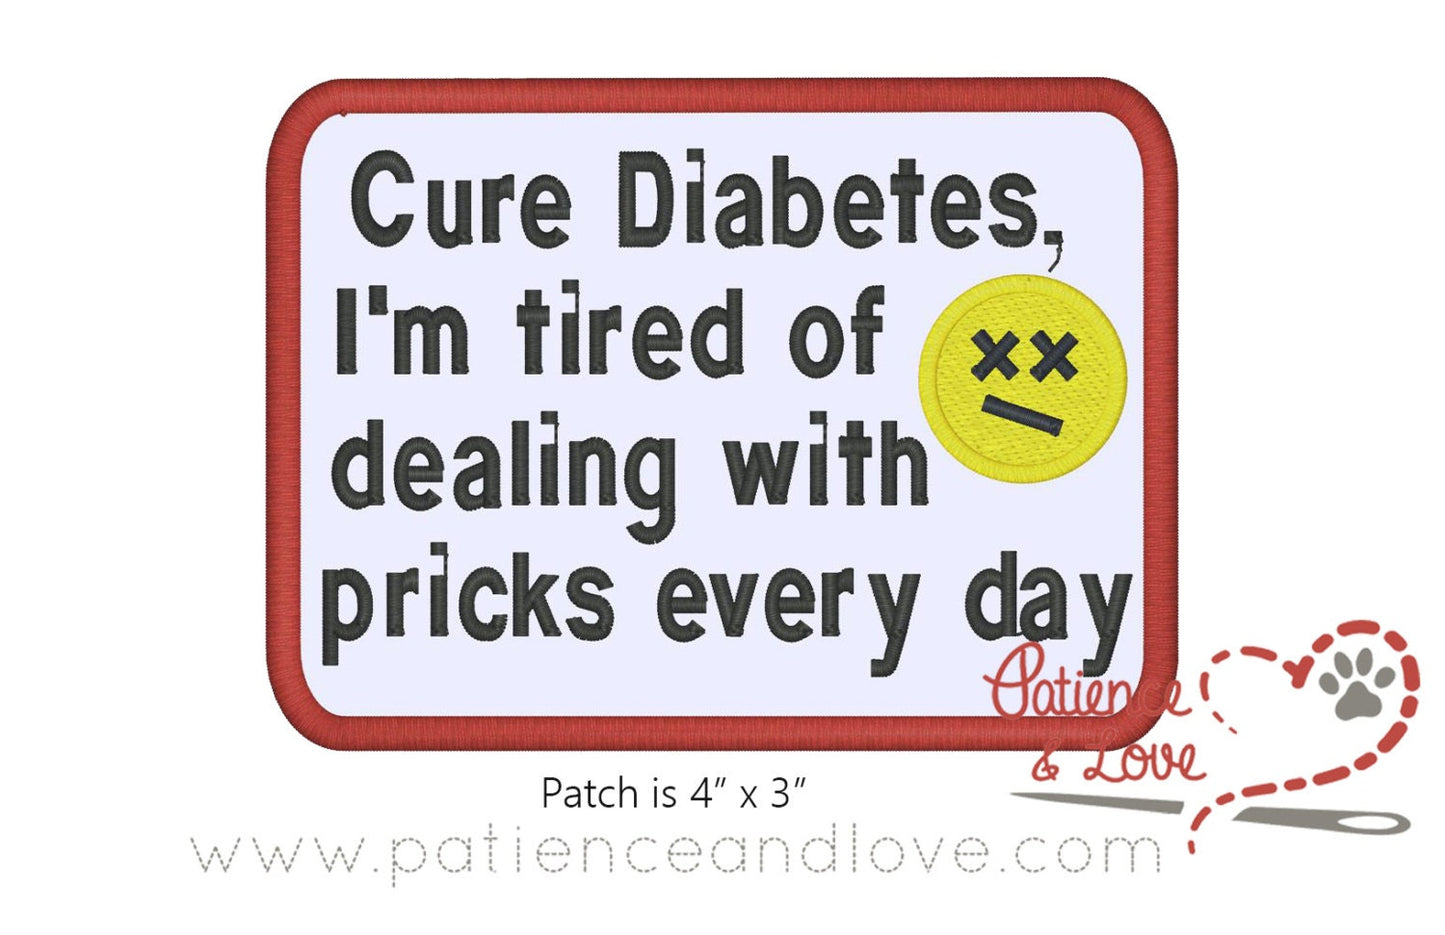 Cure Diabetes - I'm tired of dealing with pricks every day, 4" x 3" embroidered patch